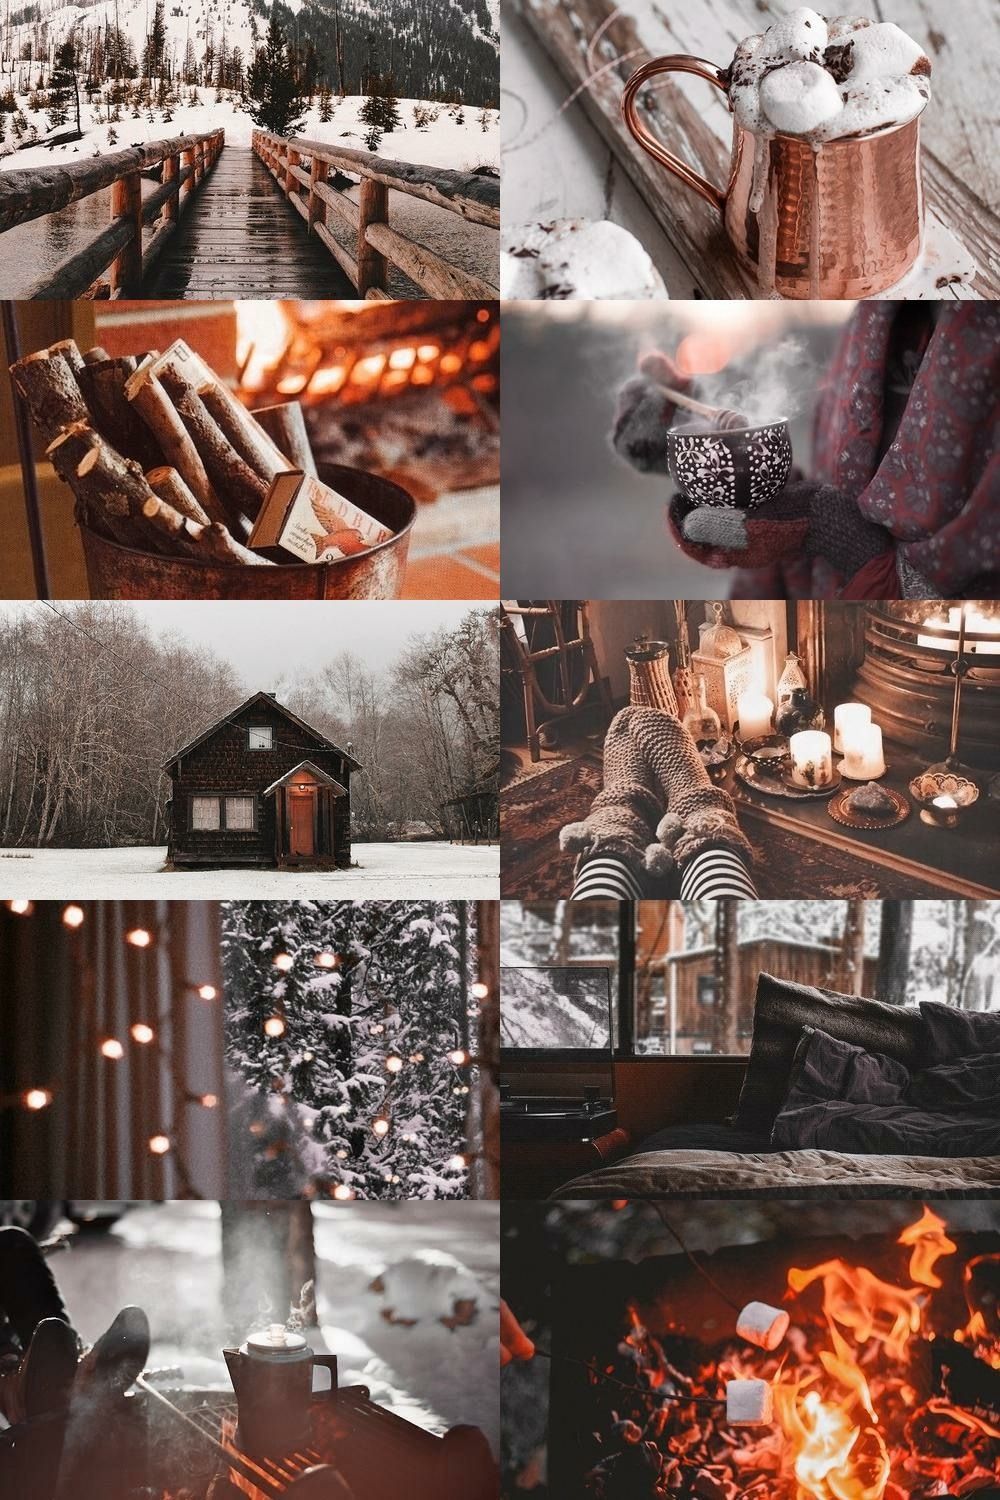 A collage of pictures with winter scenes - Cozy